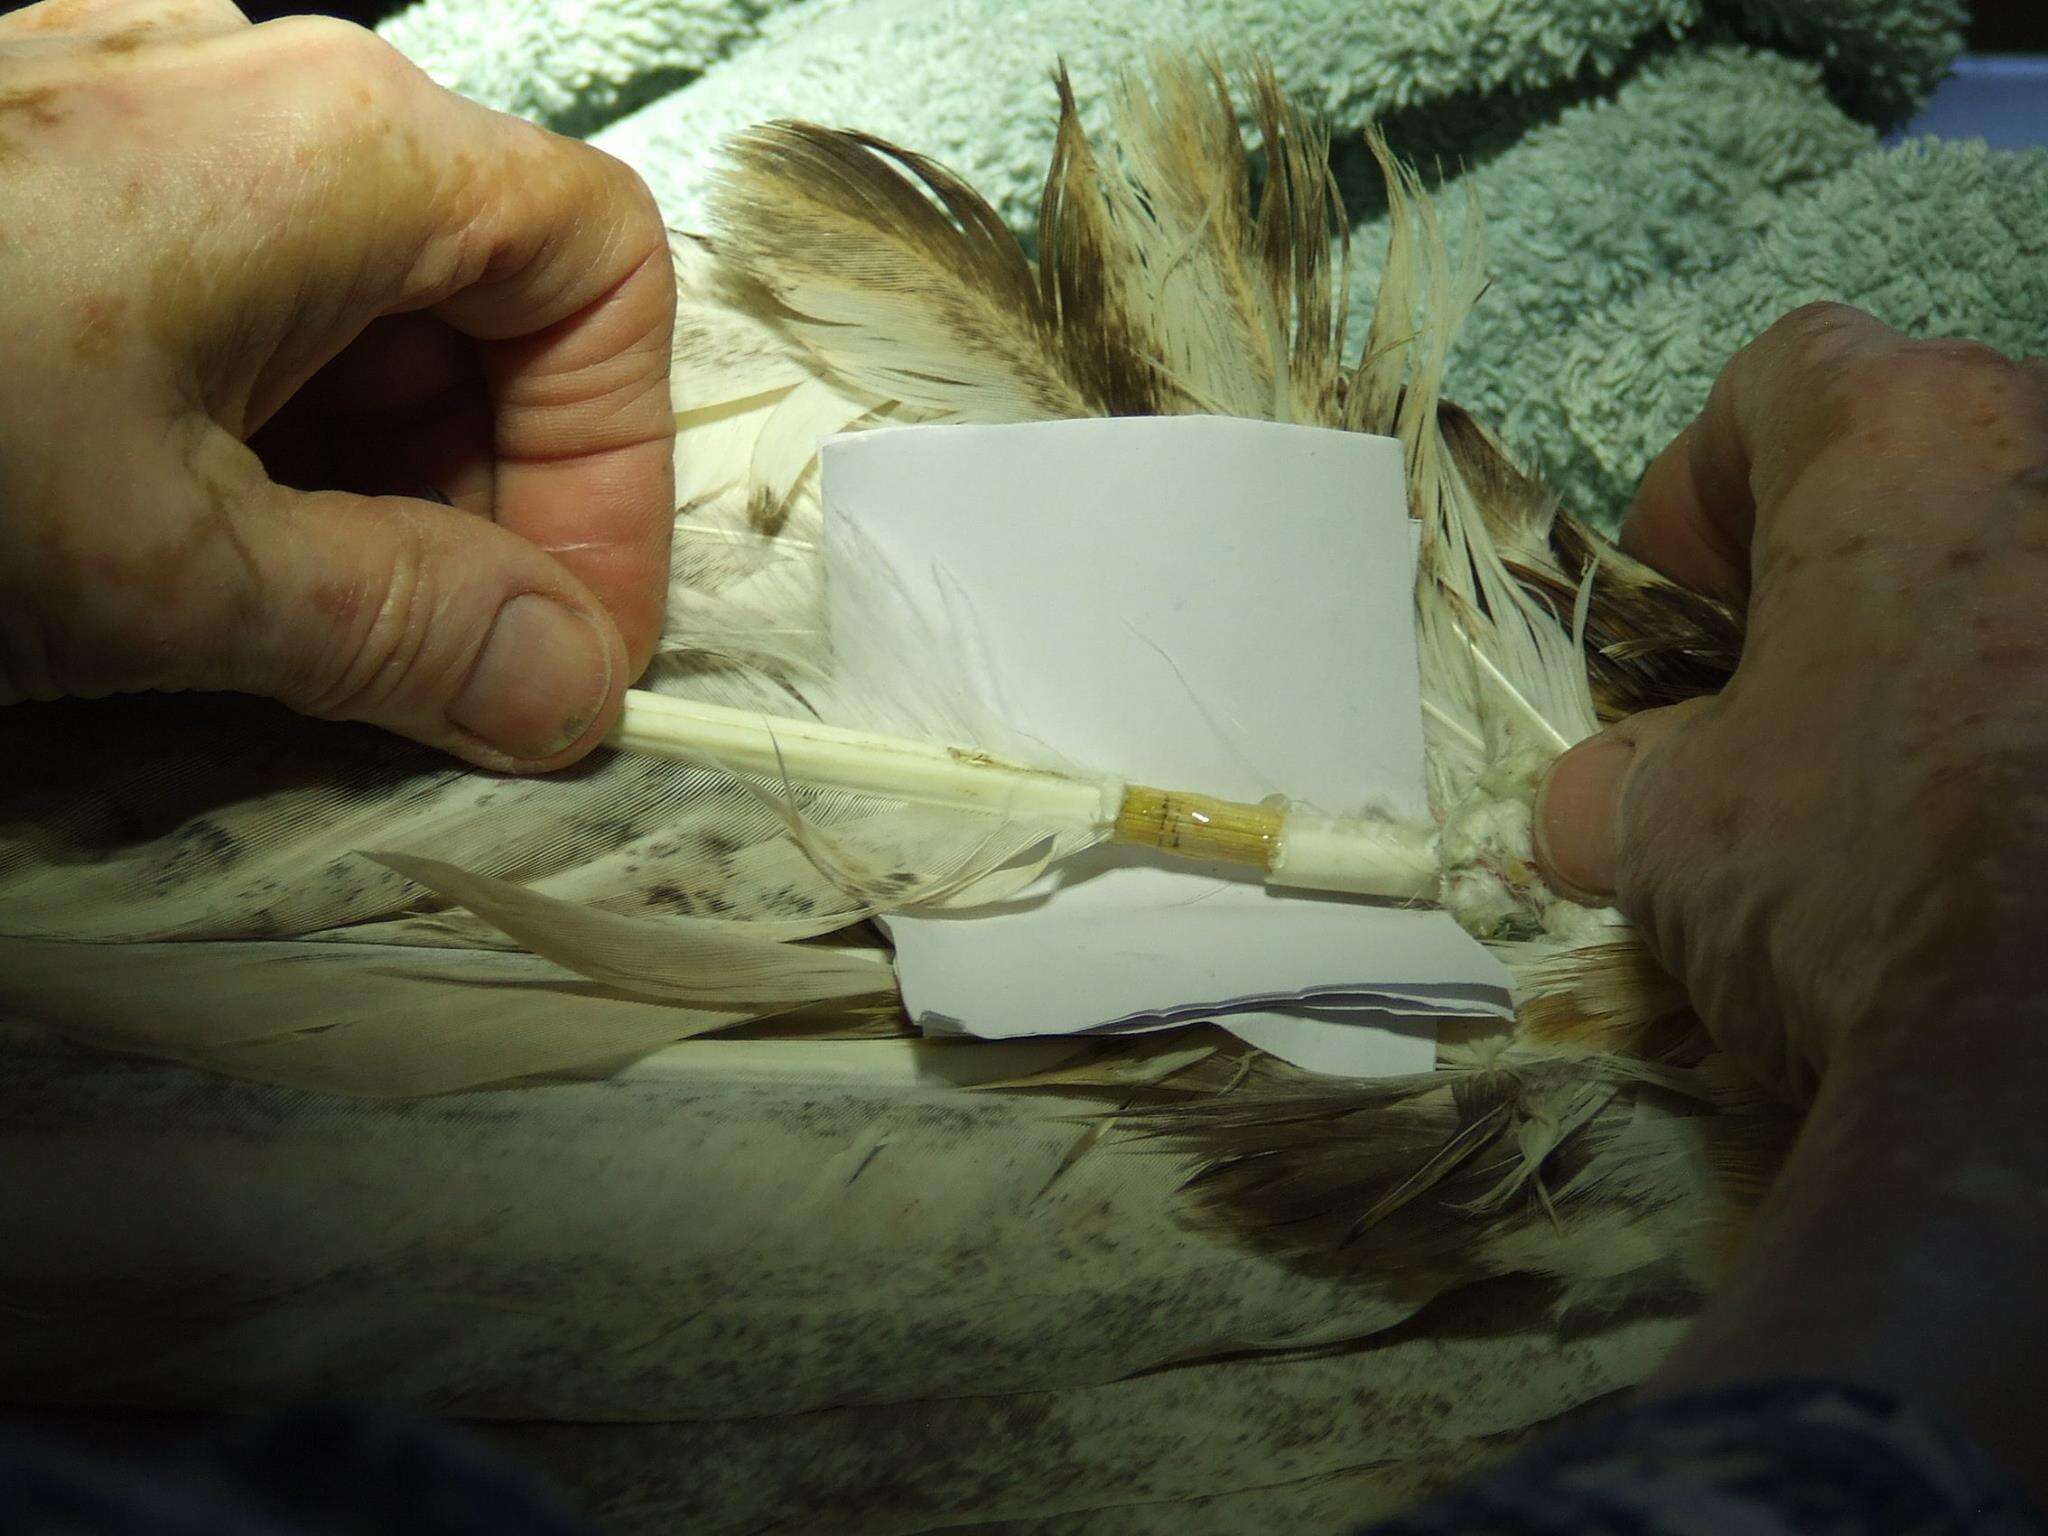 Feather being glued into place in eagle's wing